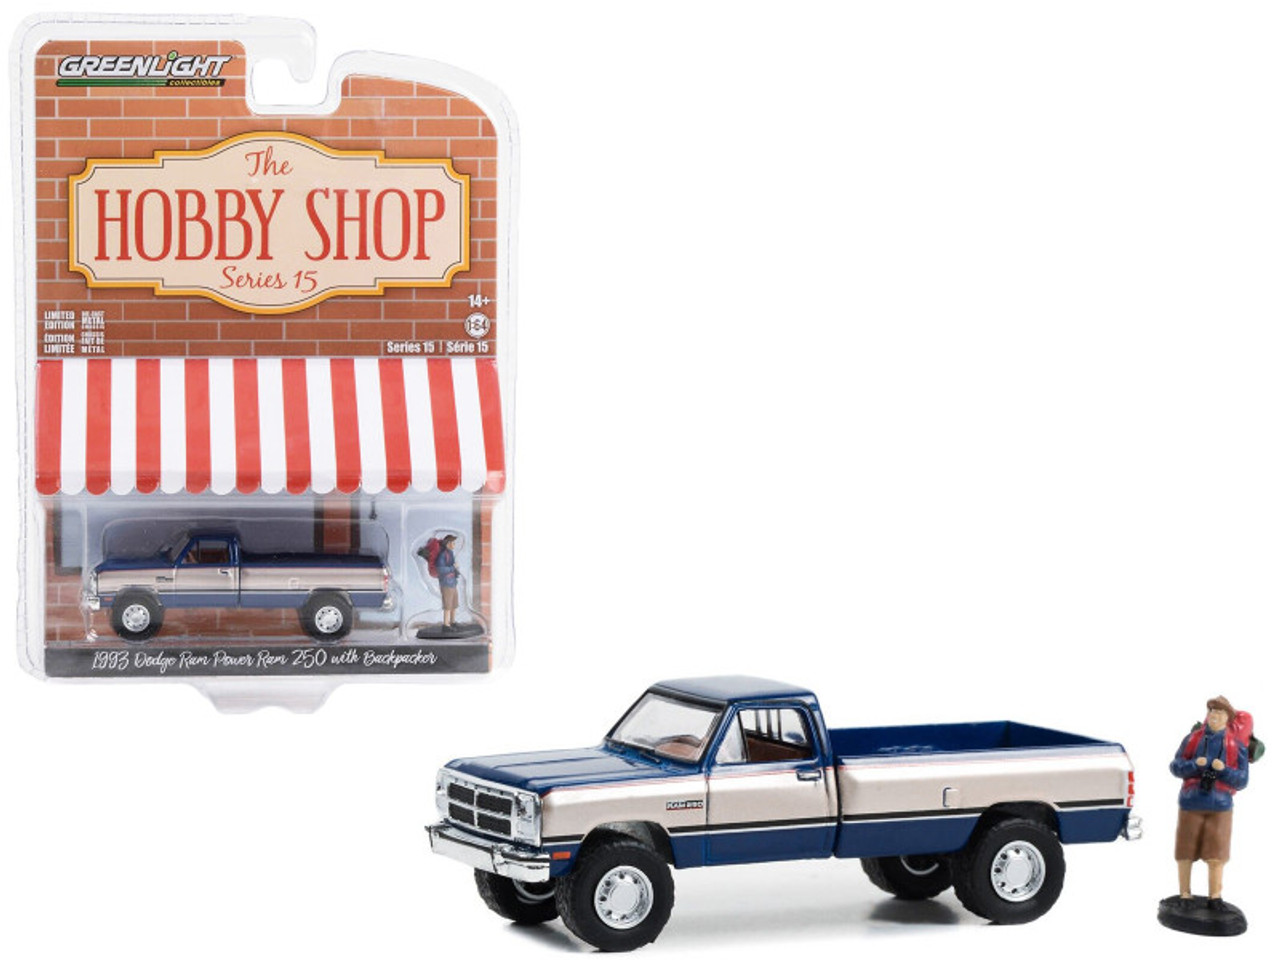 1993 Dodge Ram Power Ram 250 Pickup Truck Blue and Silver Metallic with Backpacker Figure "The Hobby Shop" Series 15 1/64 Diecast Model Car by Greenlight